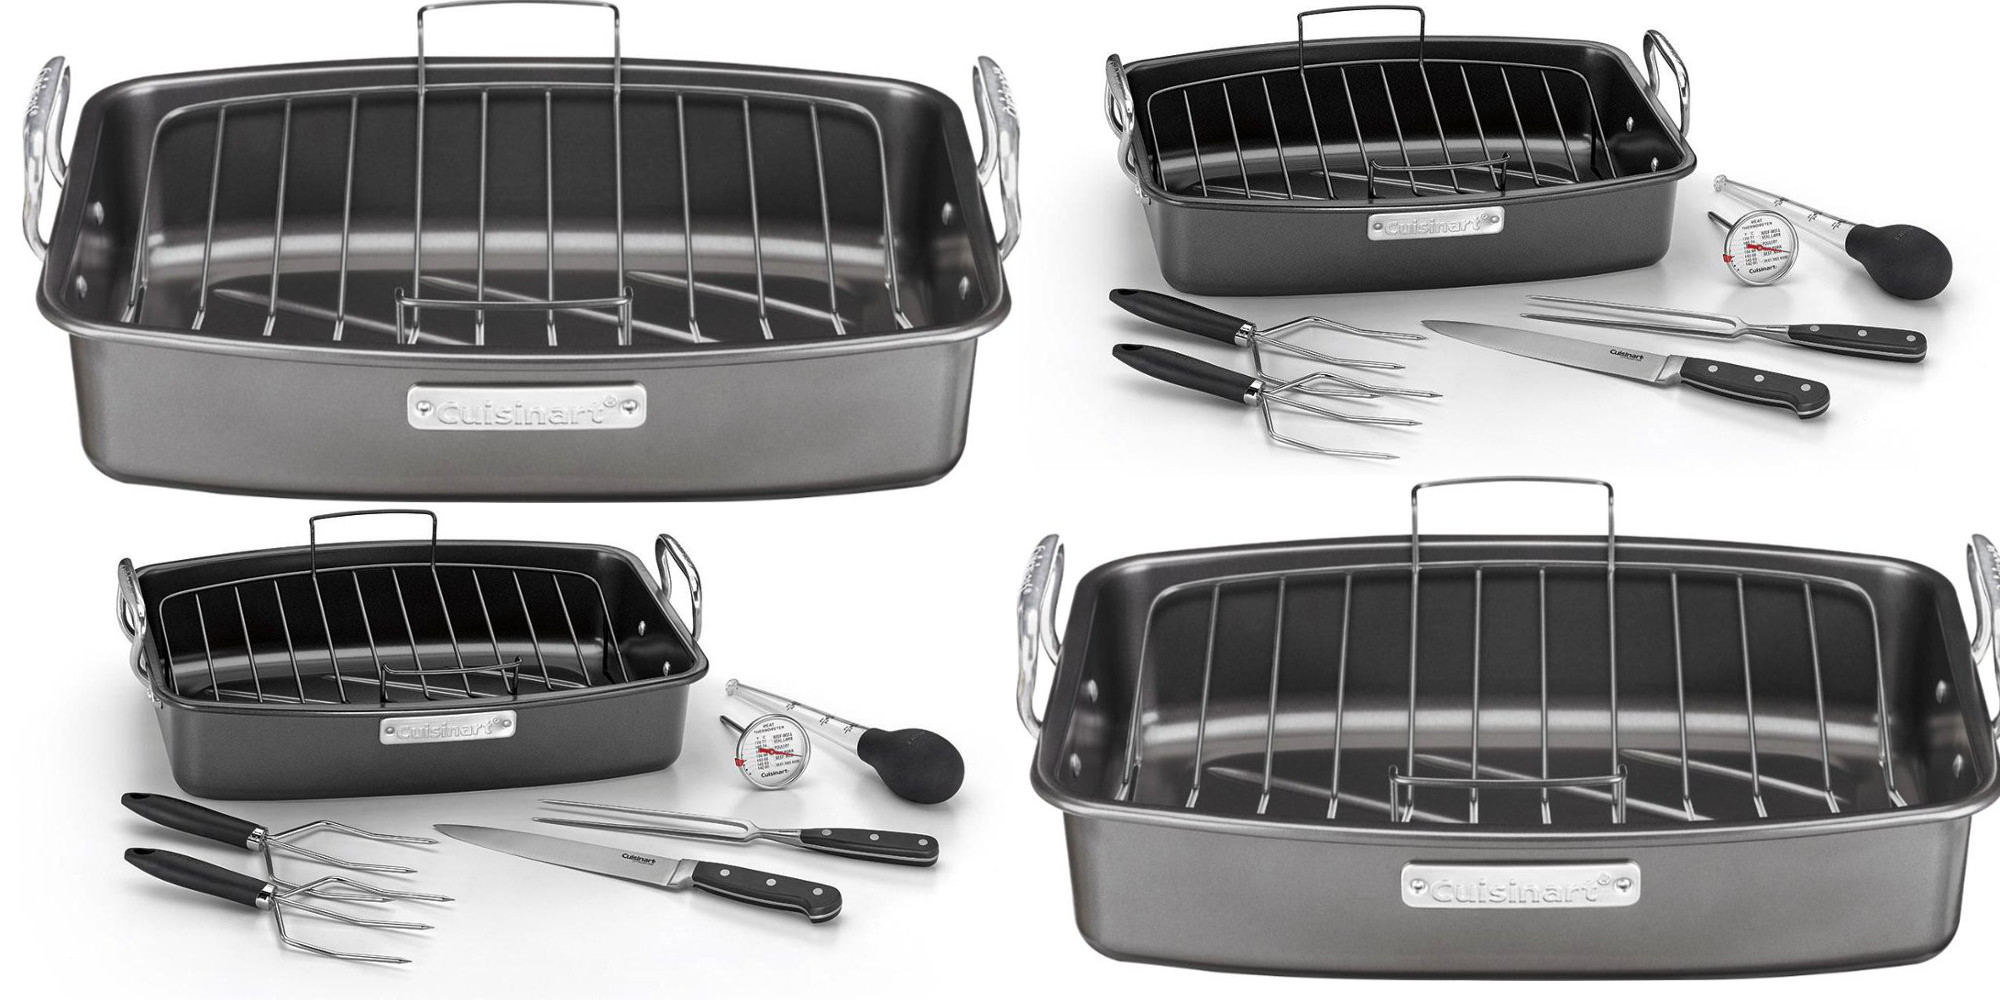 Be ready for your next feast w/ Cuisinart's Steel Roasting Pan Set for $40  (Reg. up to $100)